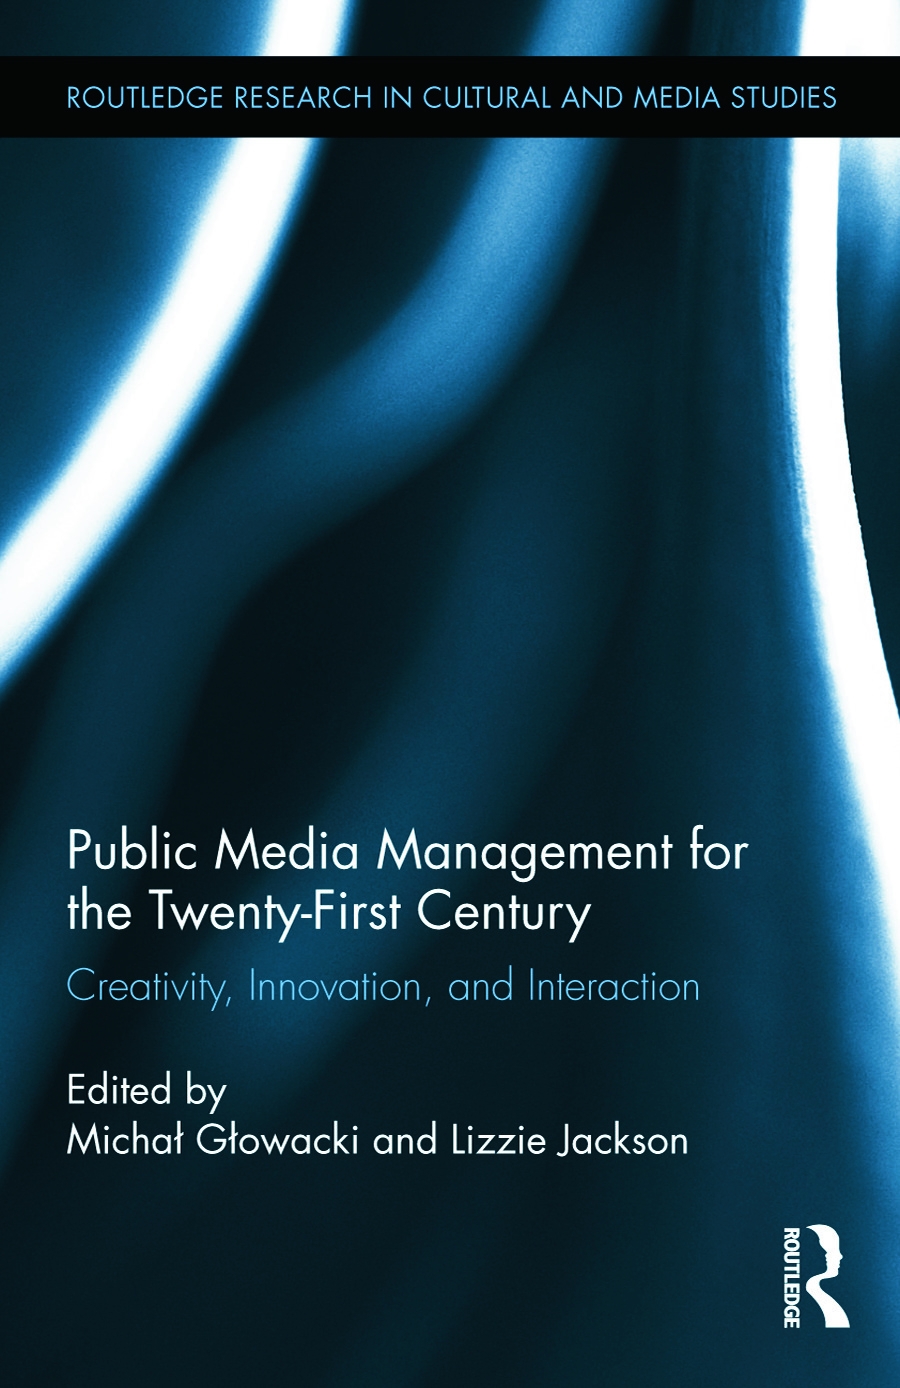 Public Media Management for the Twenty-First Century: Creativity, Innovation, and Interaction